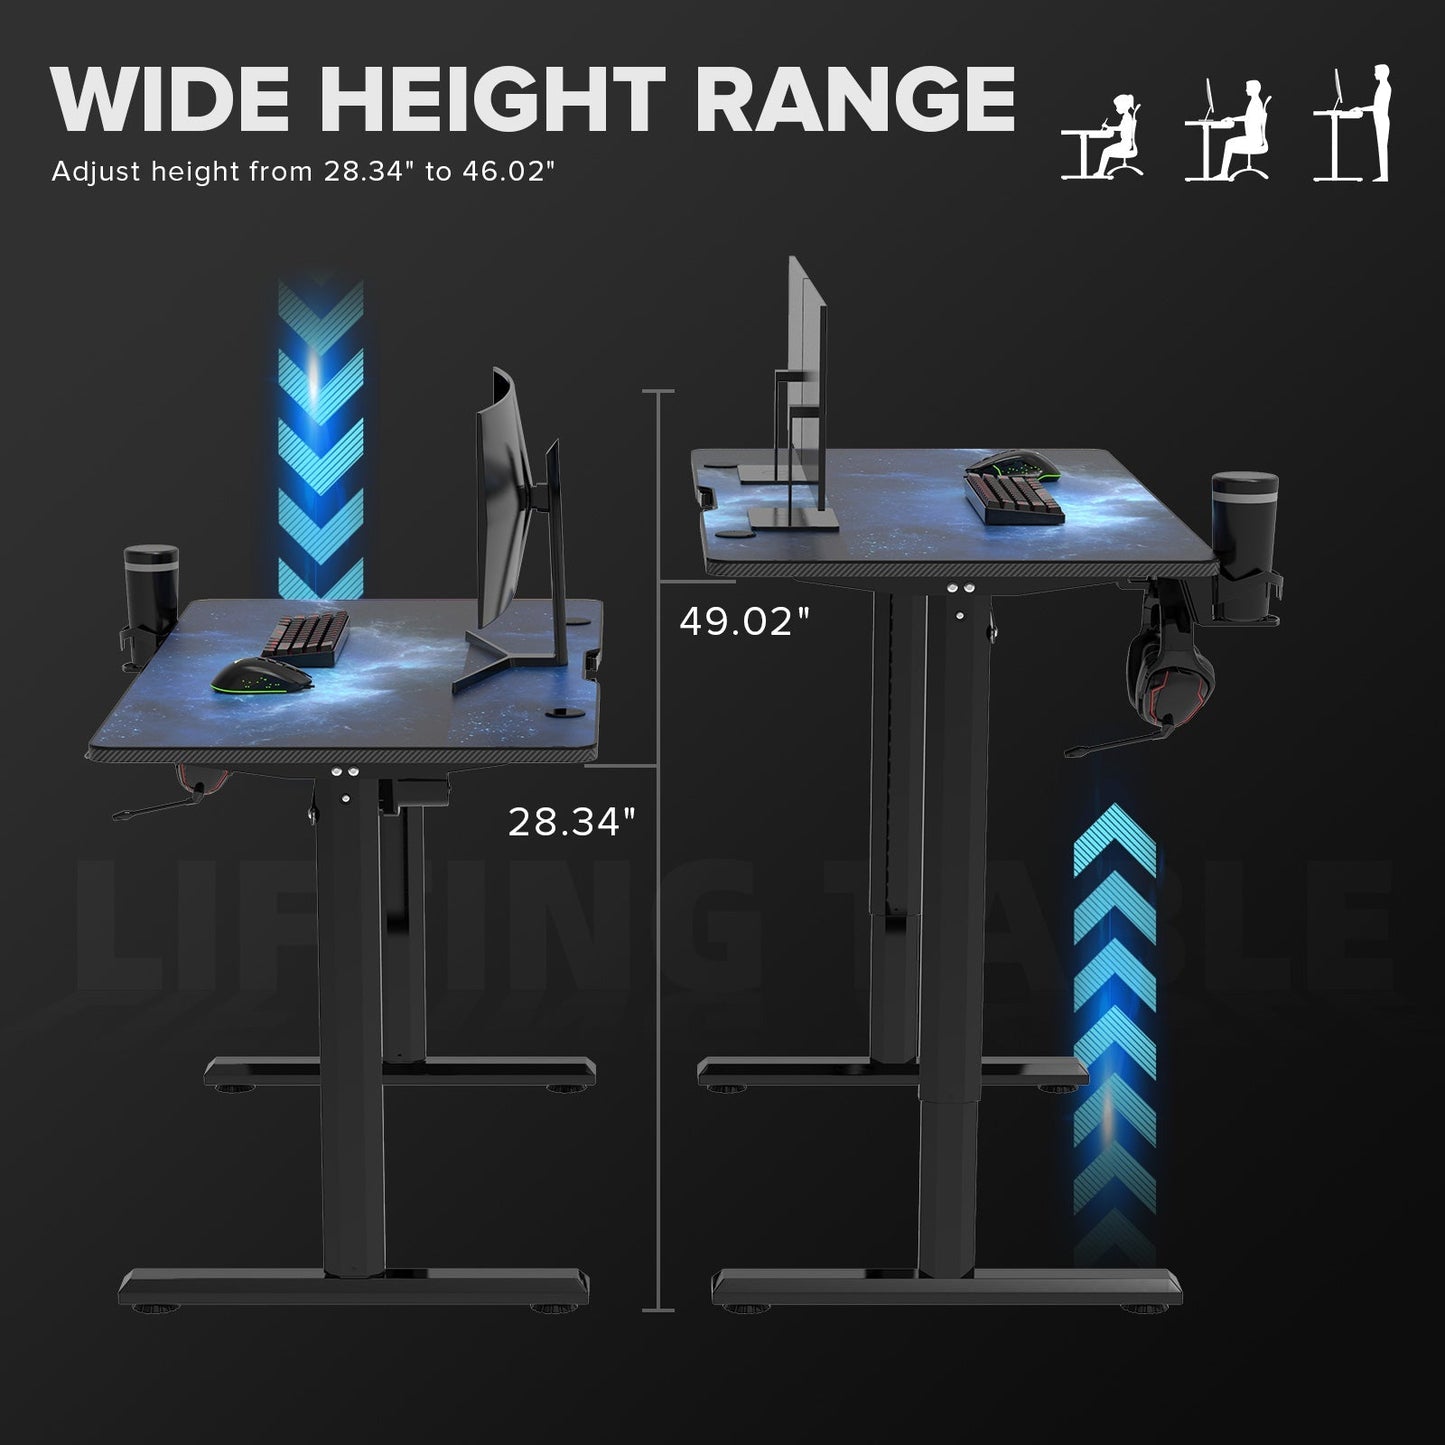 55 Inches Electric Standing Gaming Desk WMT GESD 01